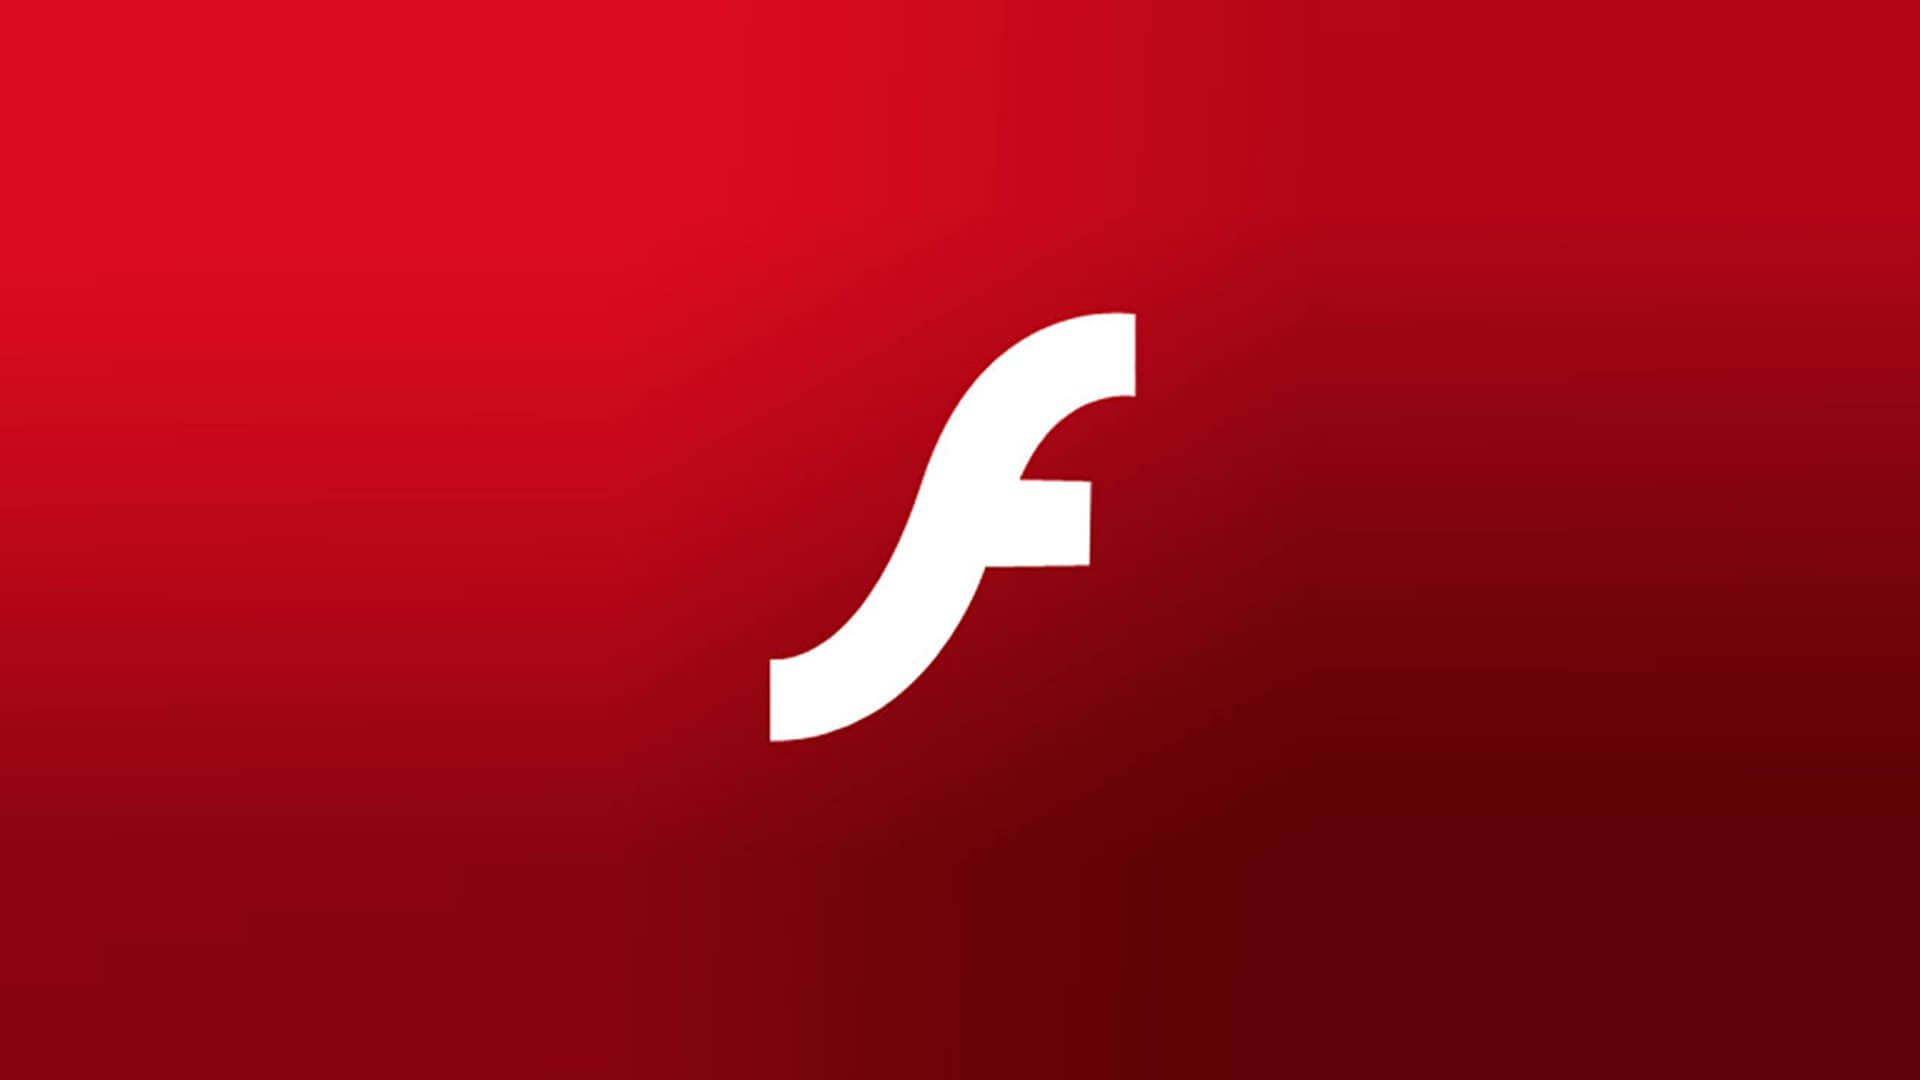 How To Install Adobe Flash Player - A Windows 10 Update Removed It! - Tech  News and Discoveries | Henri Le Chart Noir